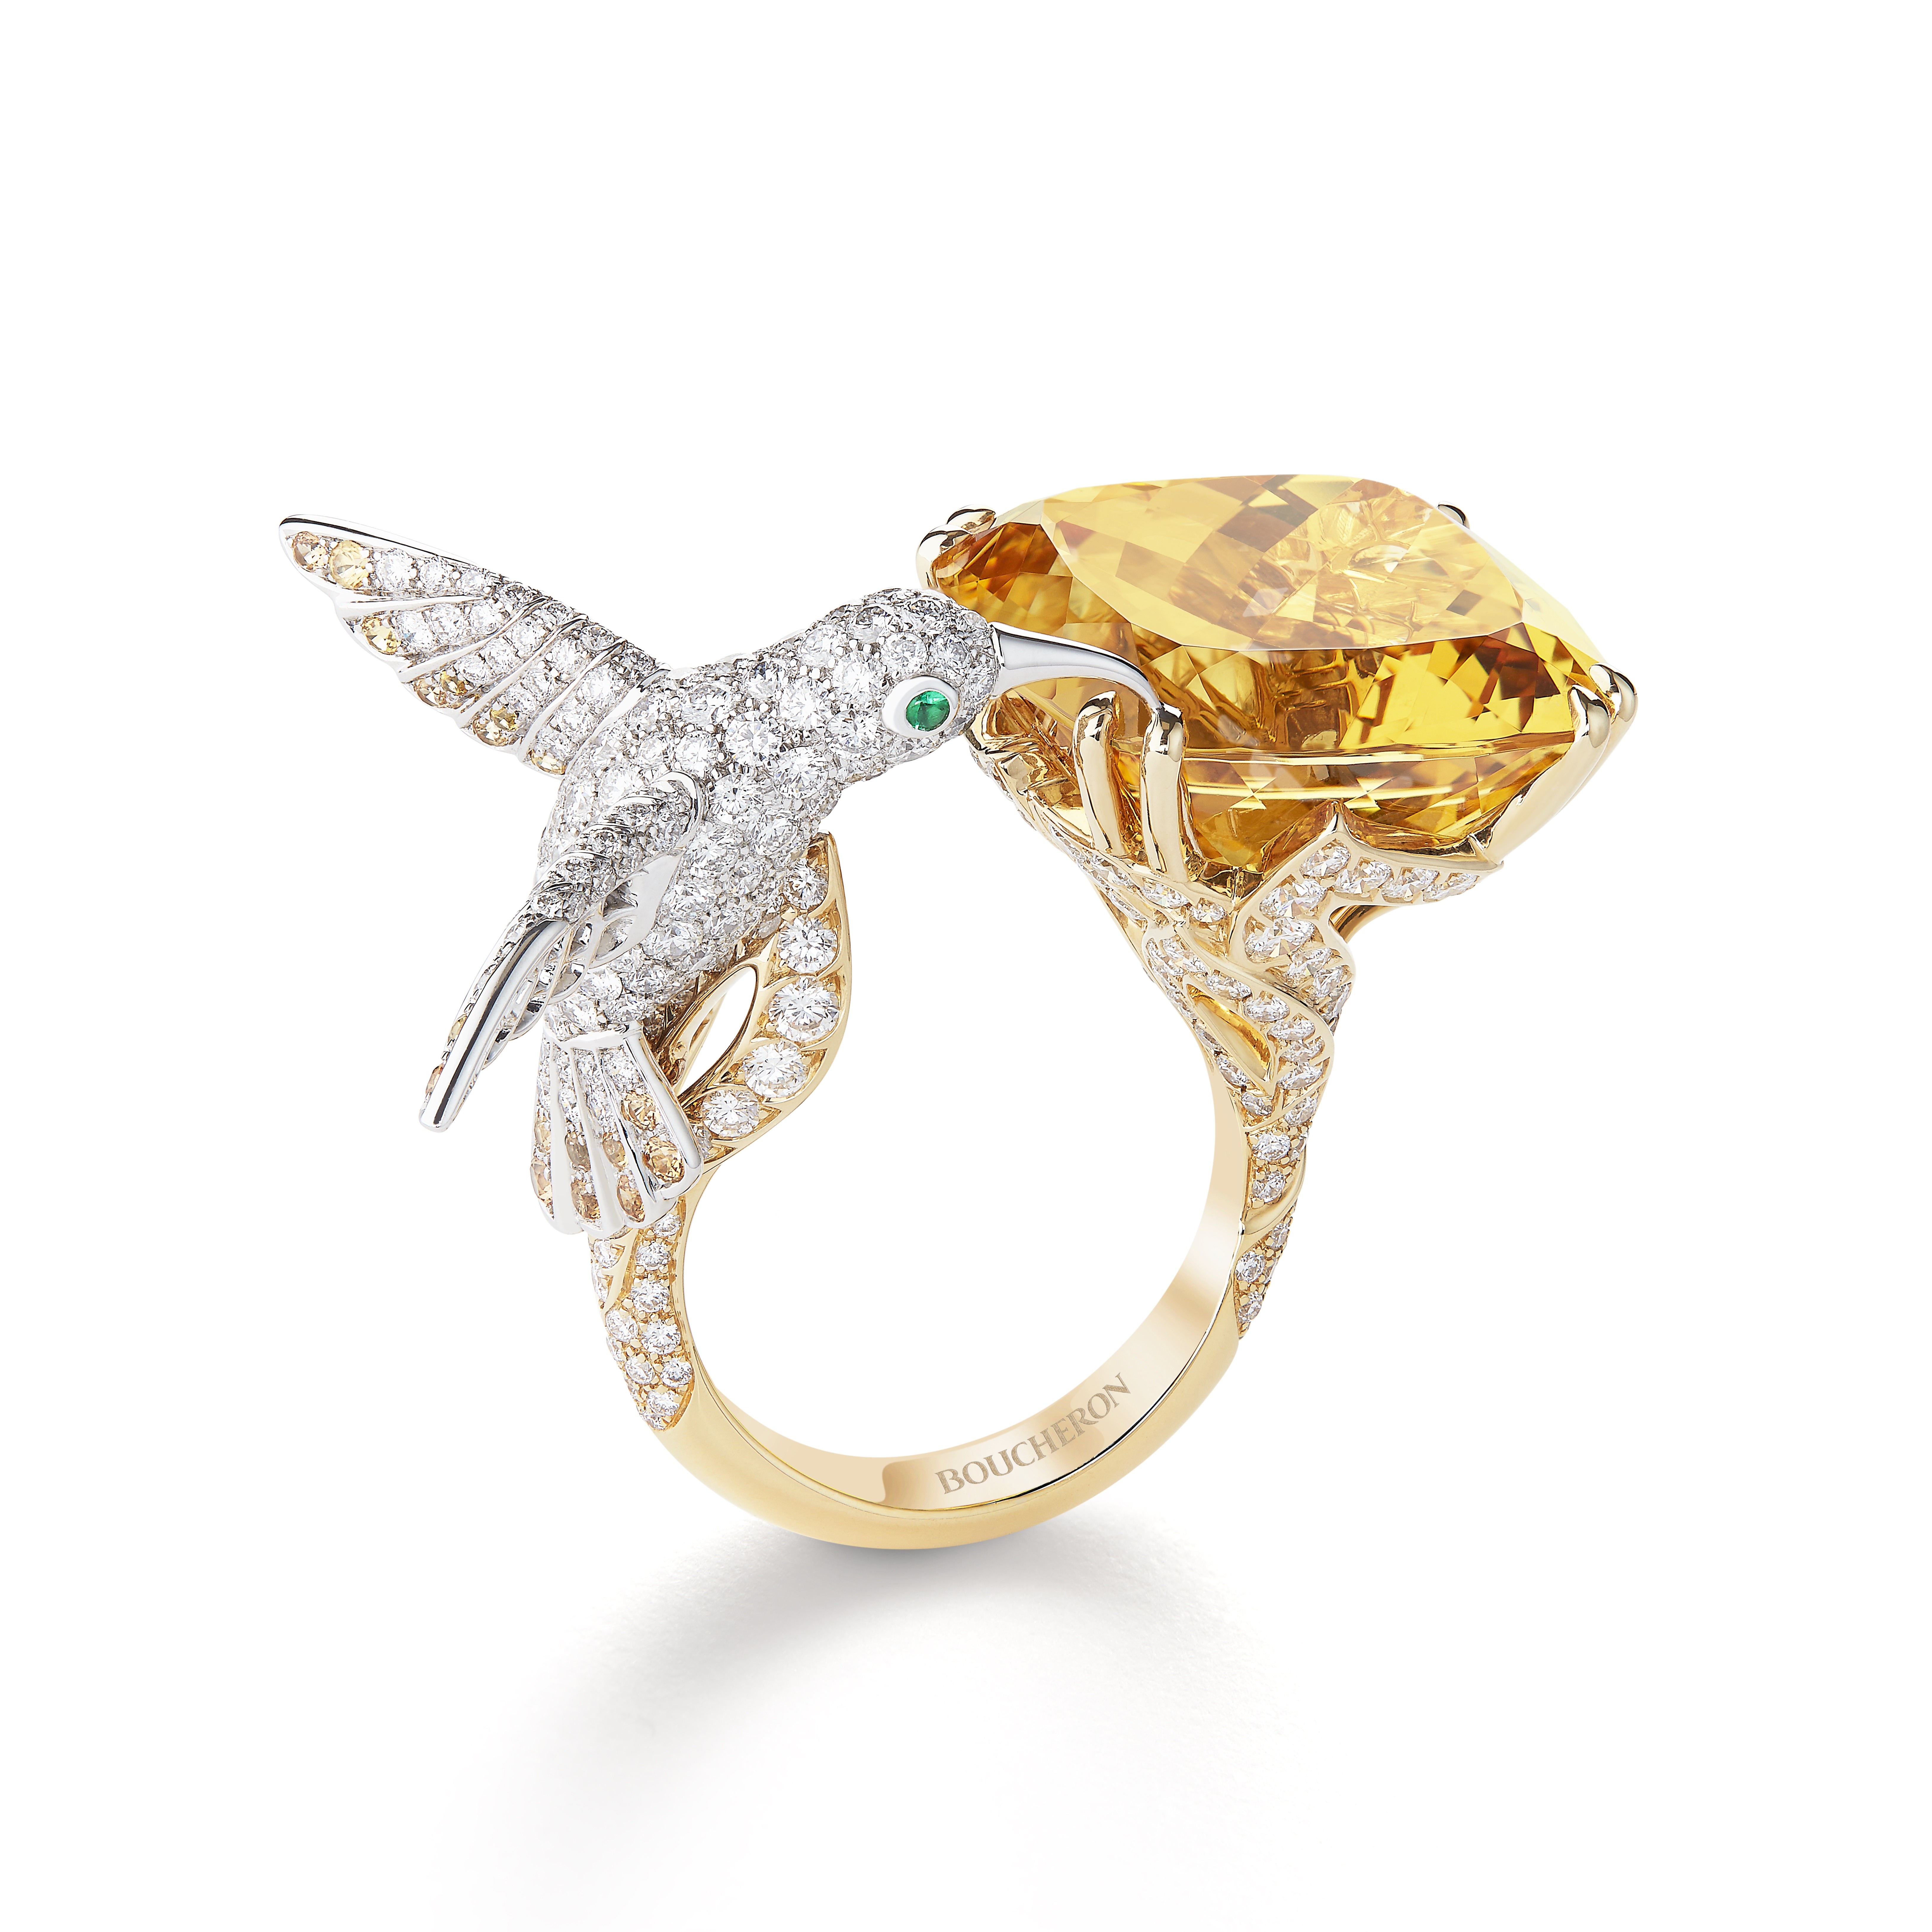 Boucheron. The shimmering white and yellow gold hummingbird ring, set with a yellow beryl, emeralds, sapphires and diamonds, adds some glamour to your day. Price on request